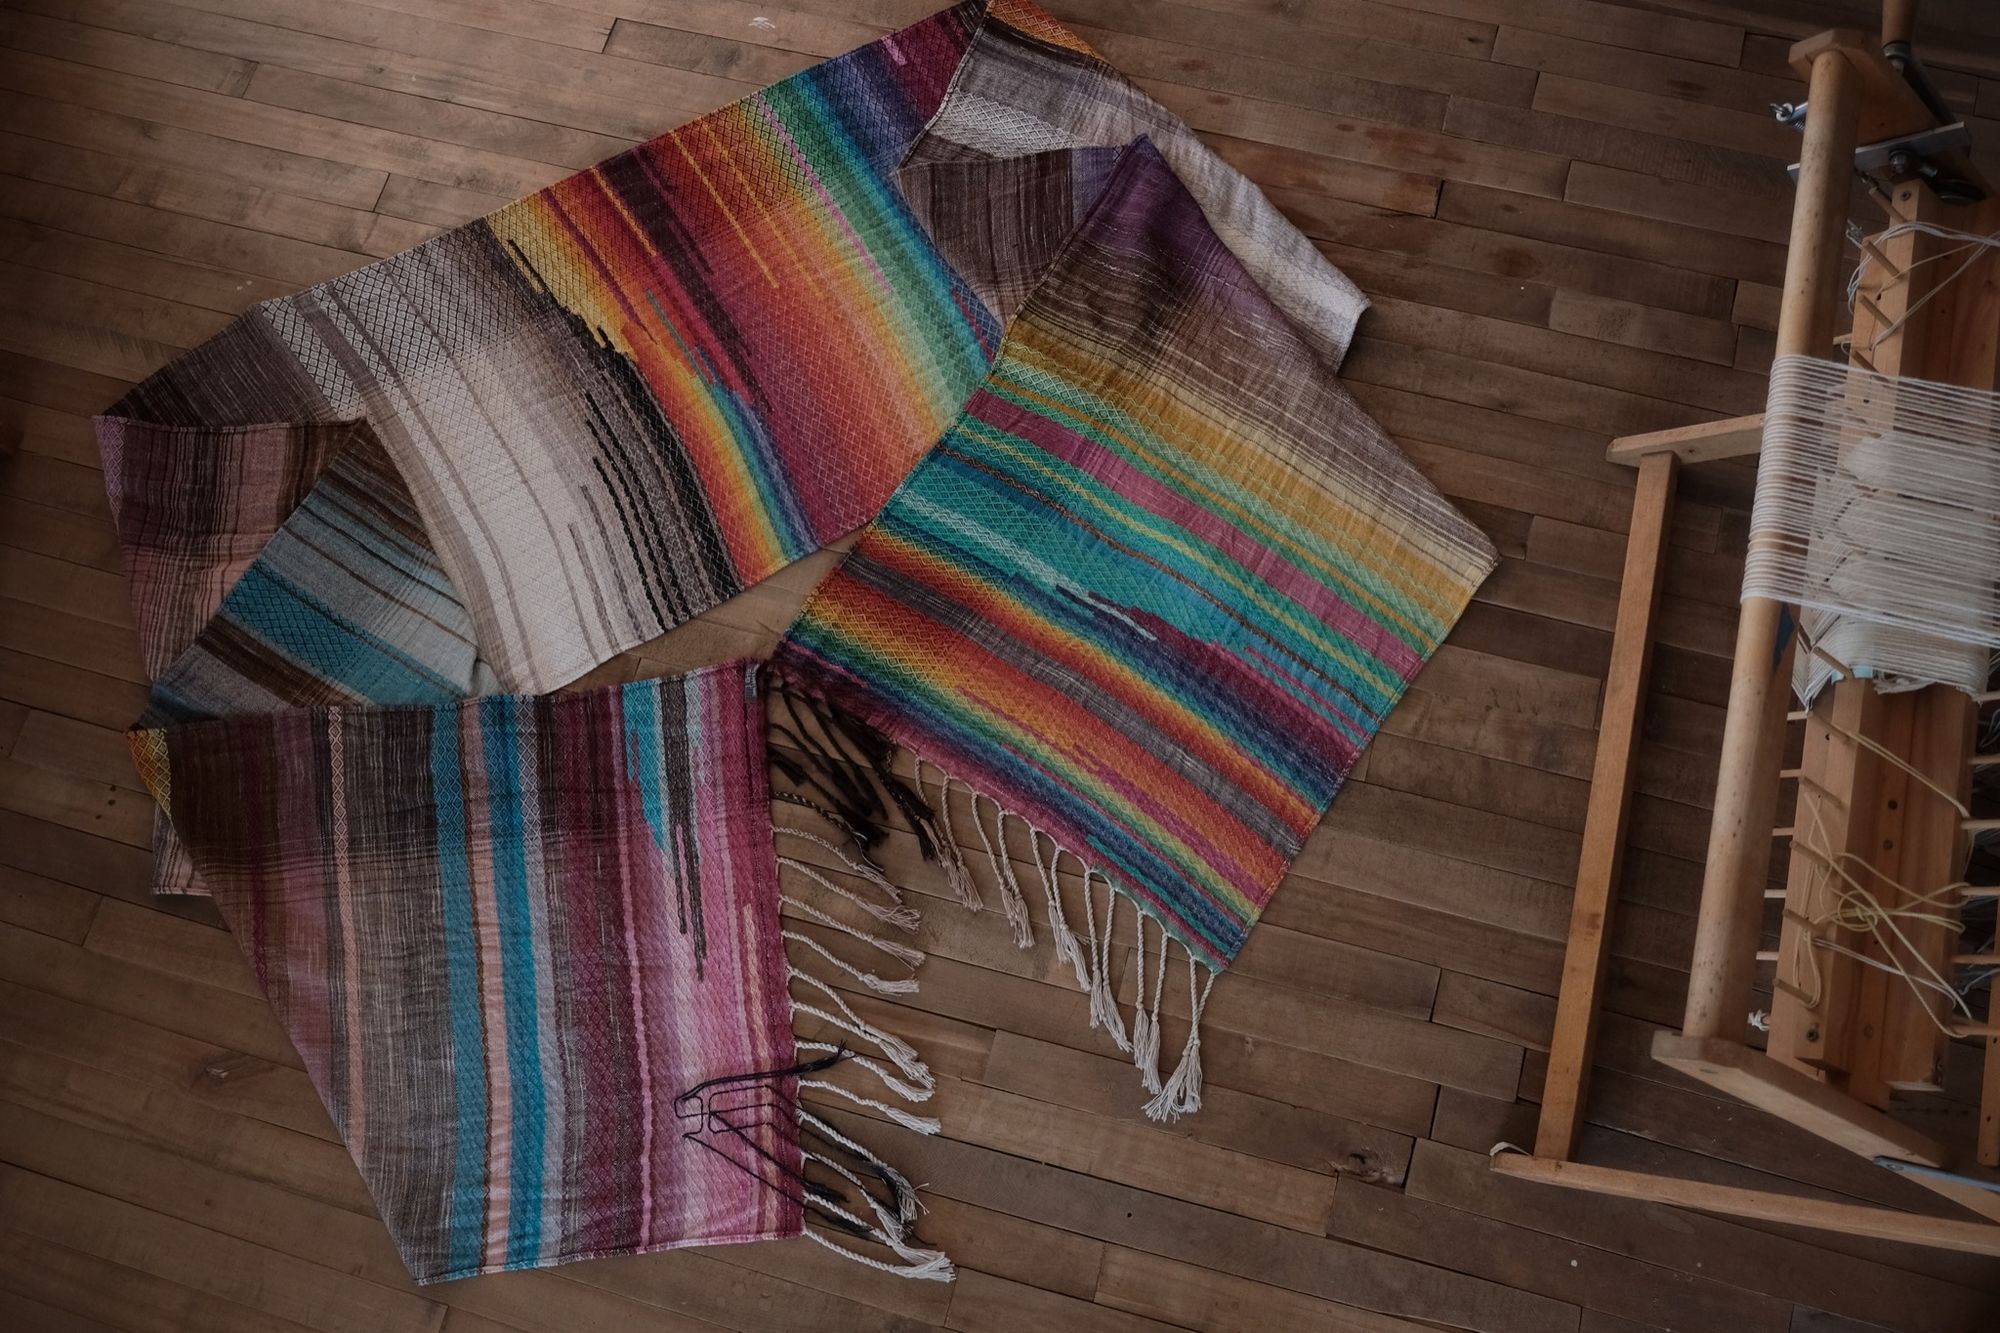 handwoven raw silk fabric woven with a diamond pattern in rainbow, gray, brown and cream colors on a wood floor with a loom in the corner